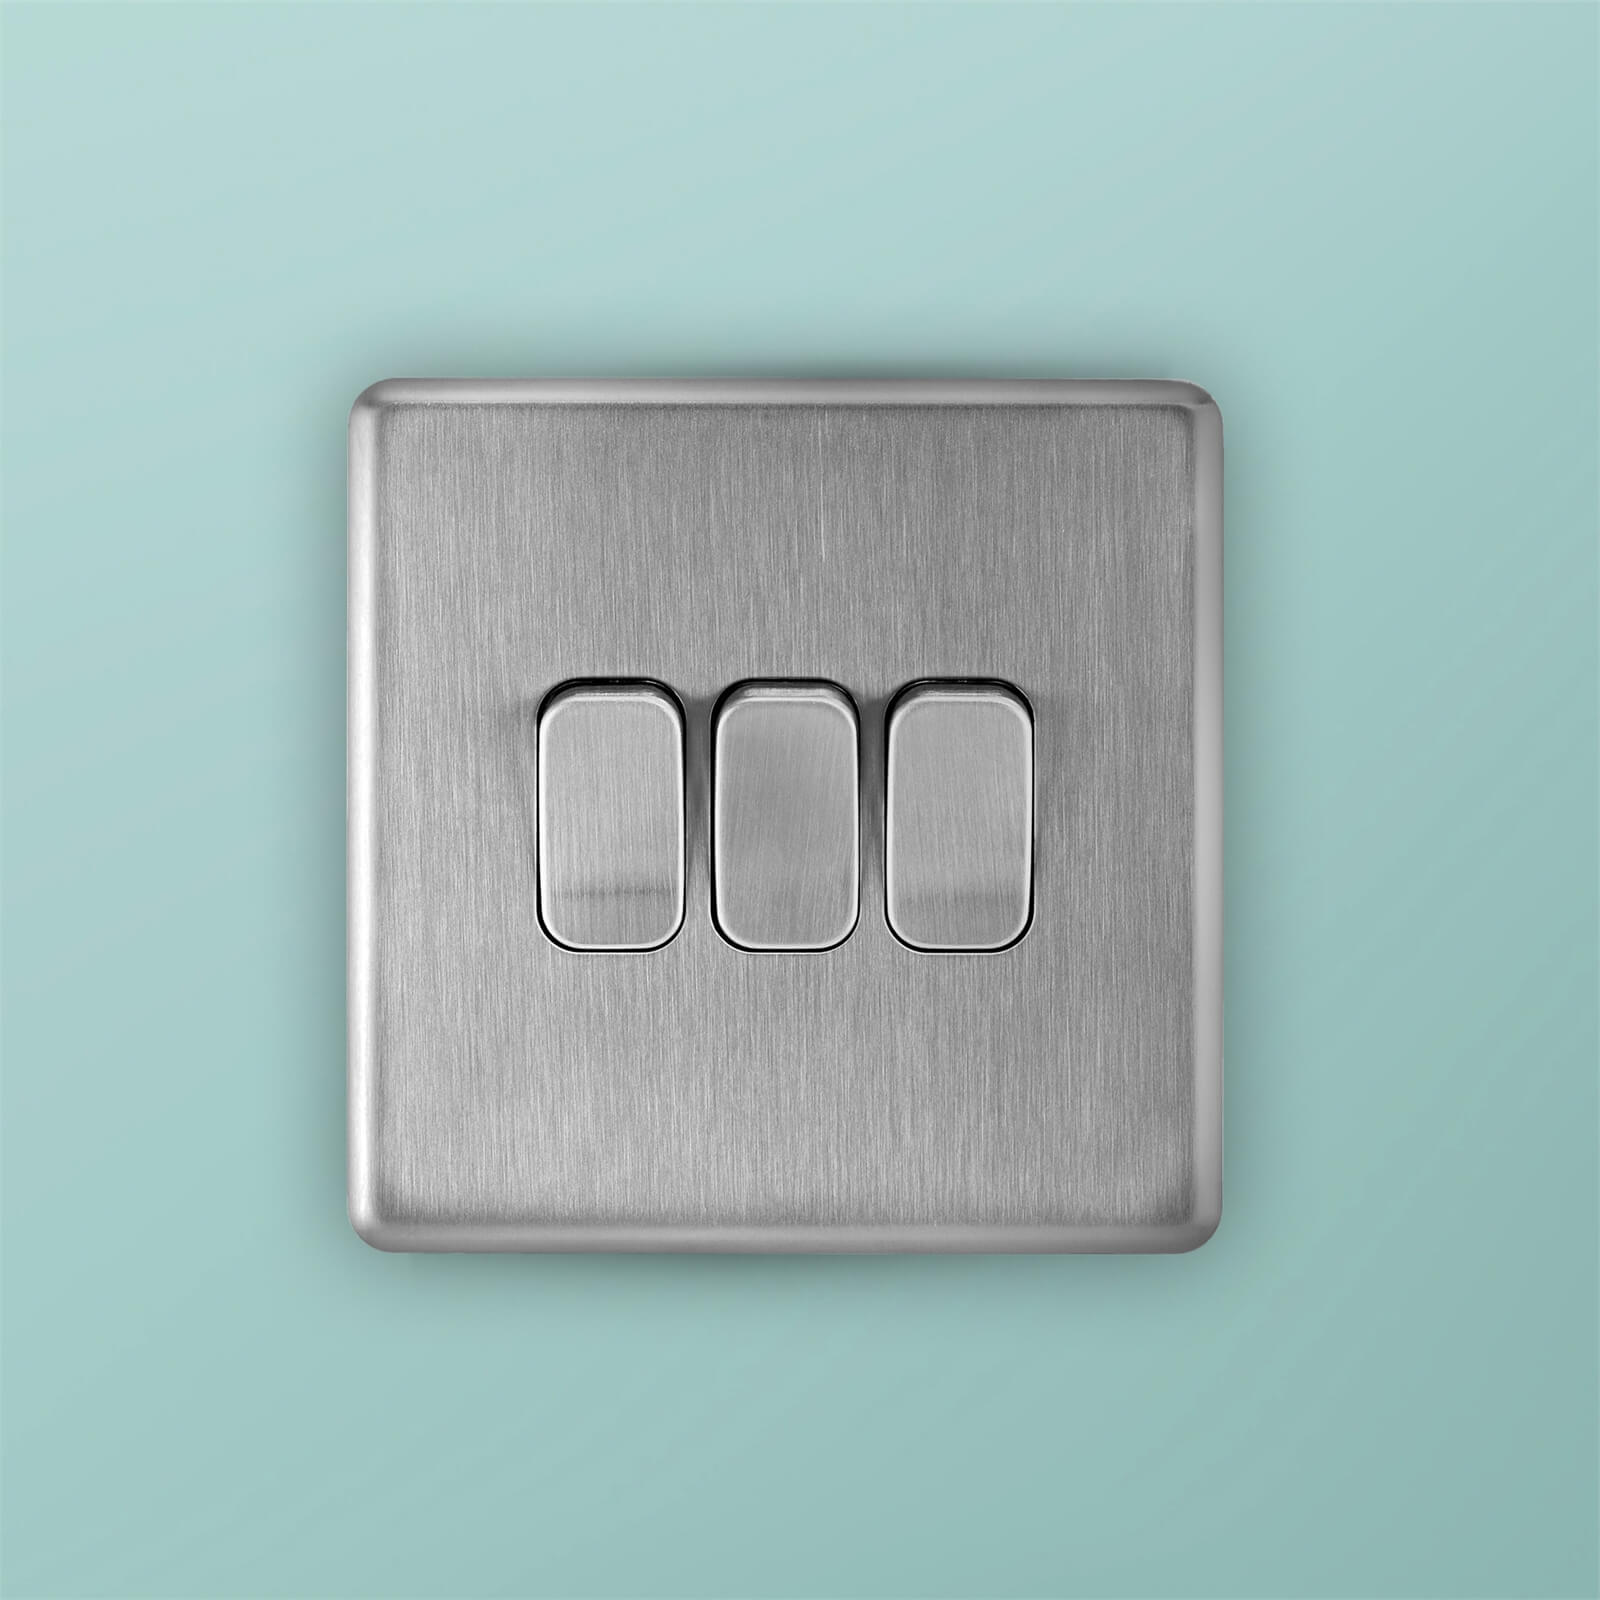 Arlec Fusion 10A 3Gang 2Way Stainless Steel Triple light switch